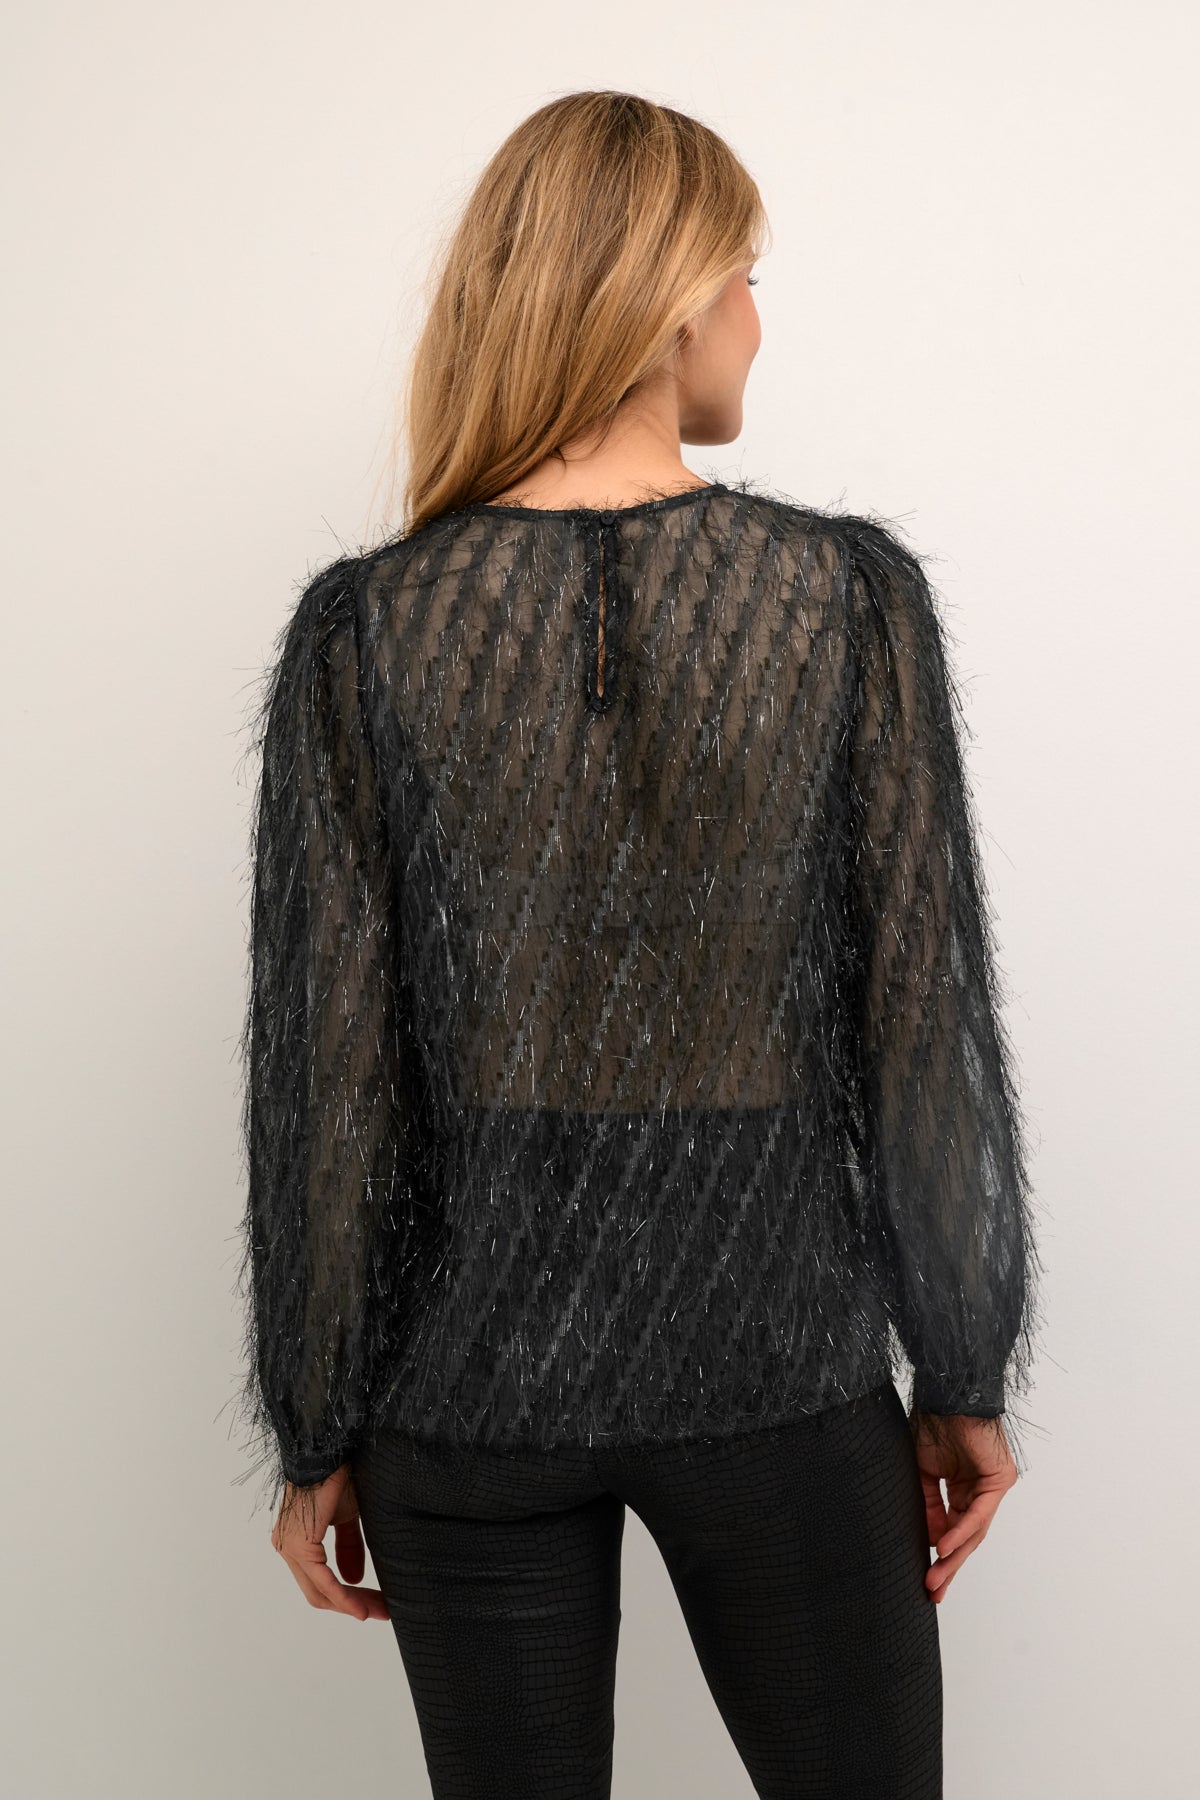 Patty Blouse in Black